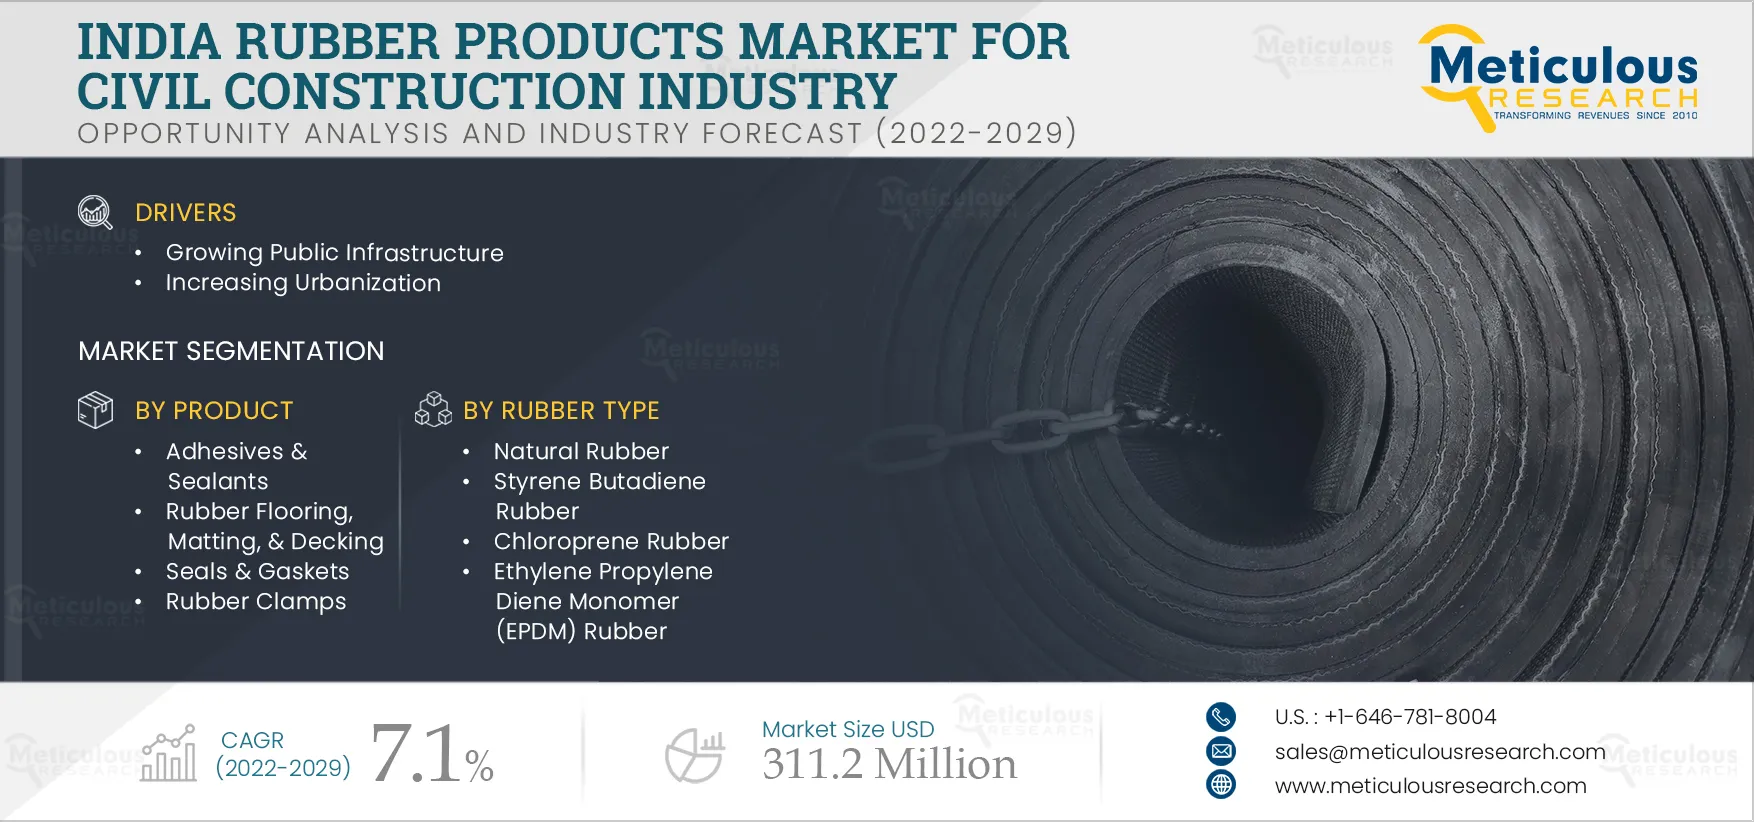  India Rubber Products Market for Civil Construction Industry